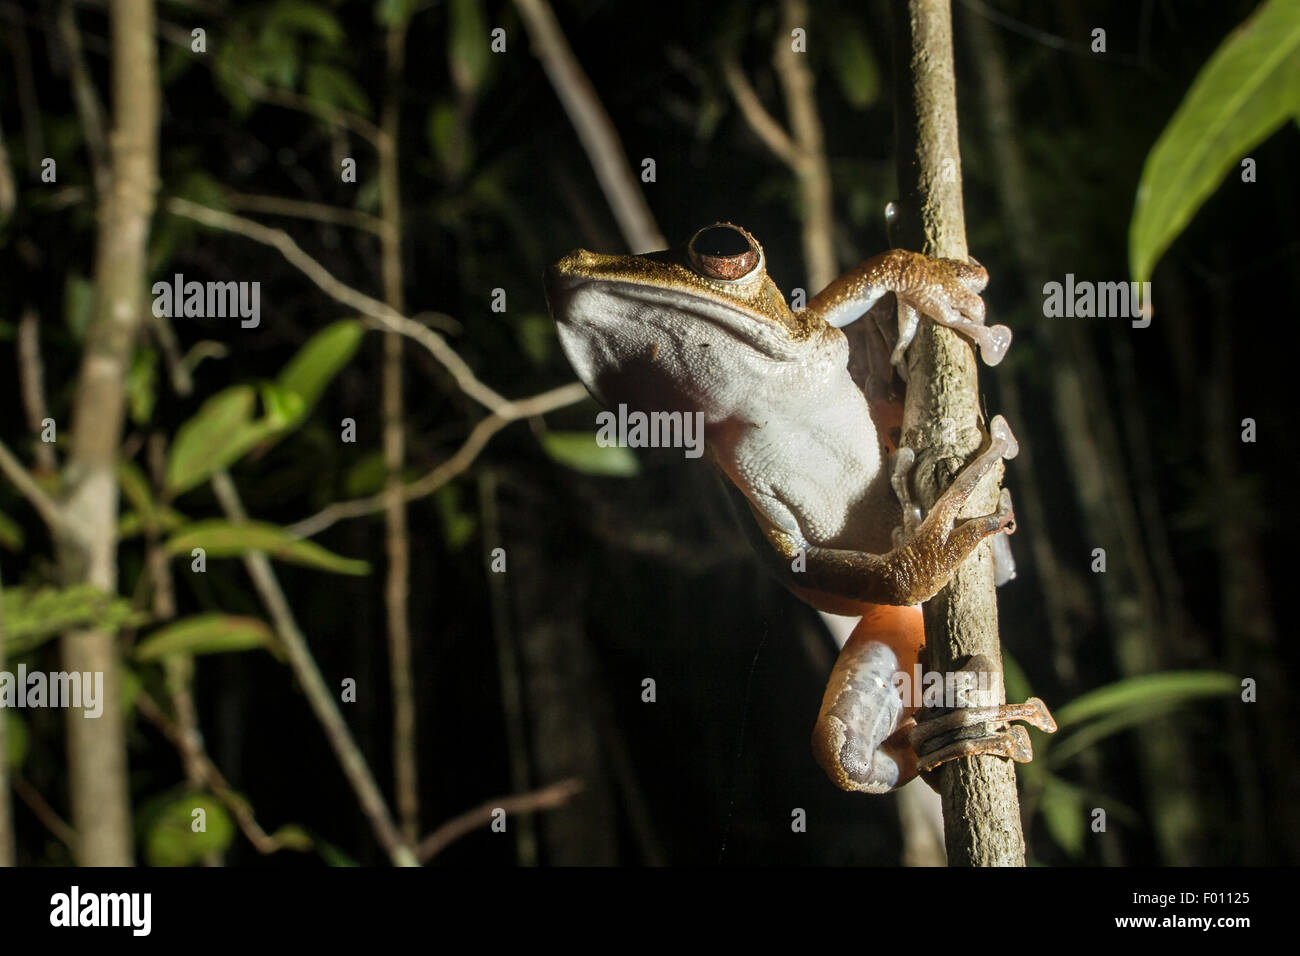 Four-lined tree frog (Polypedates leucomystax) on a tree at night. Stock Photo